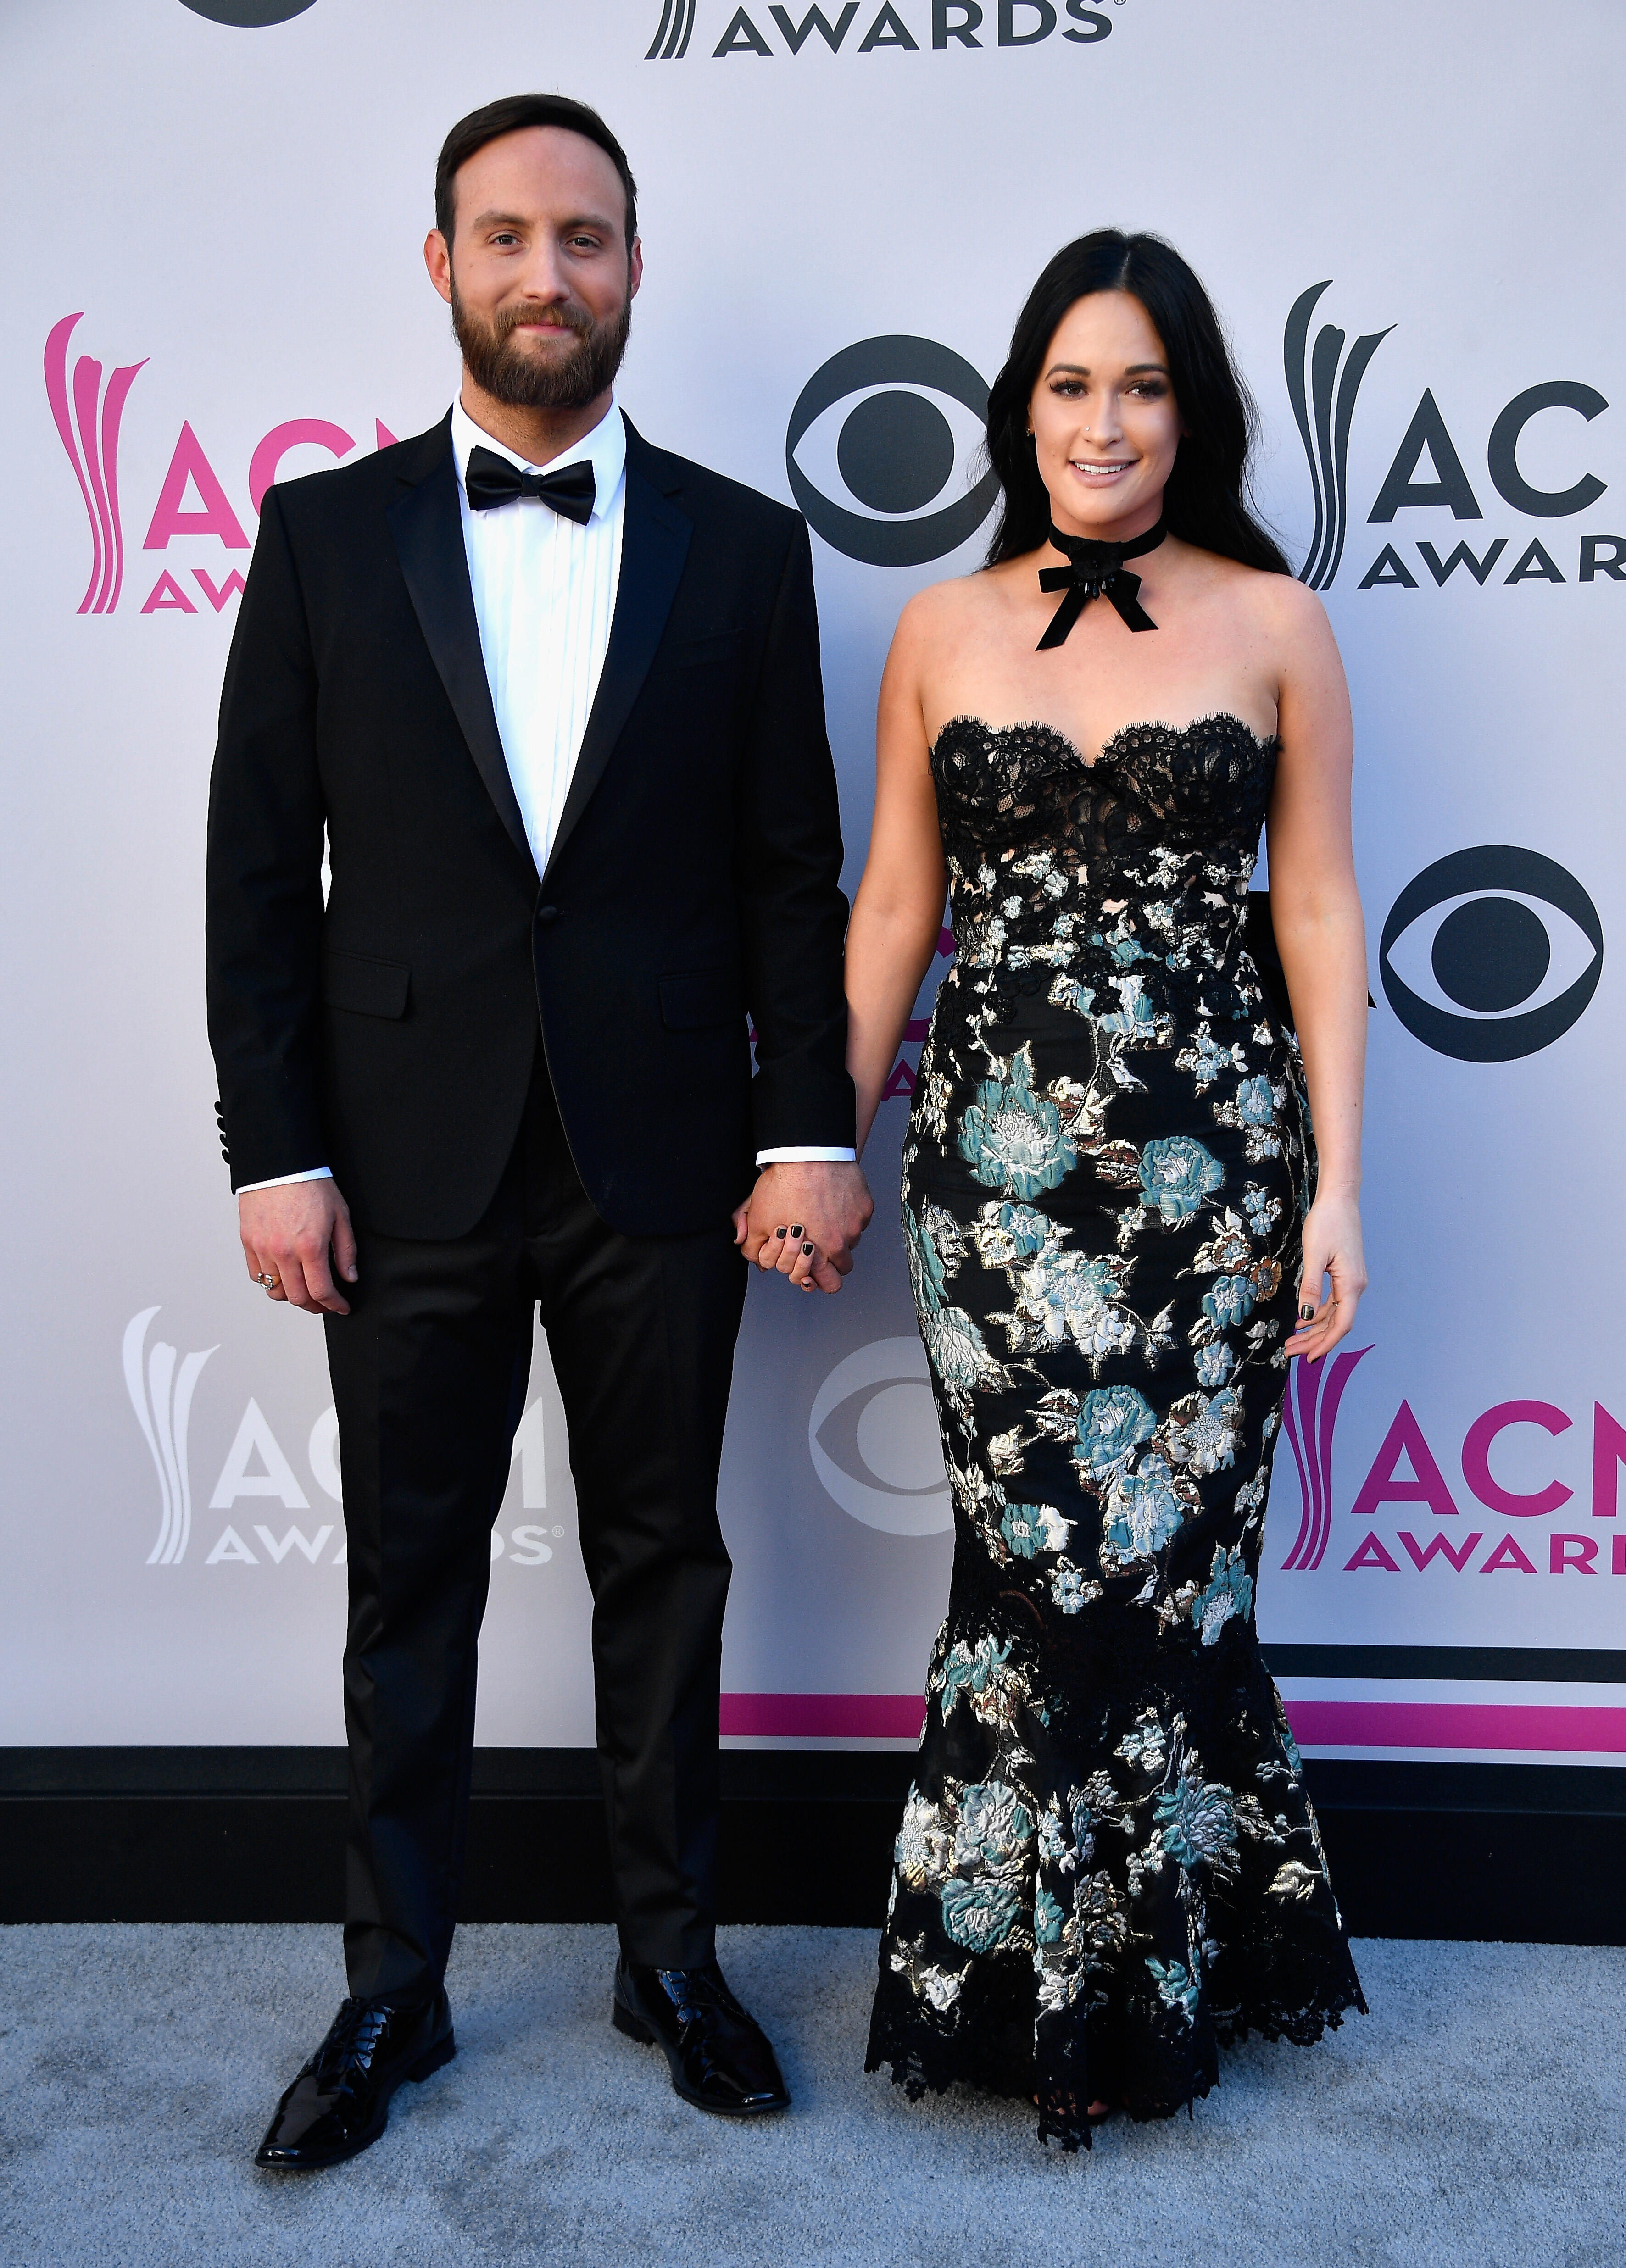 LAS VEGAS, NV - APRIL 02:  Recording artists Ruston Kelly (L) and Kacey Musgraves attend the 52nd Academy Of Country Music Awards at Toshiba Plaza on April 2, 2017 in Las Vegas, Nevada.  (Photo by Frazer Harrison/Getty Images)